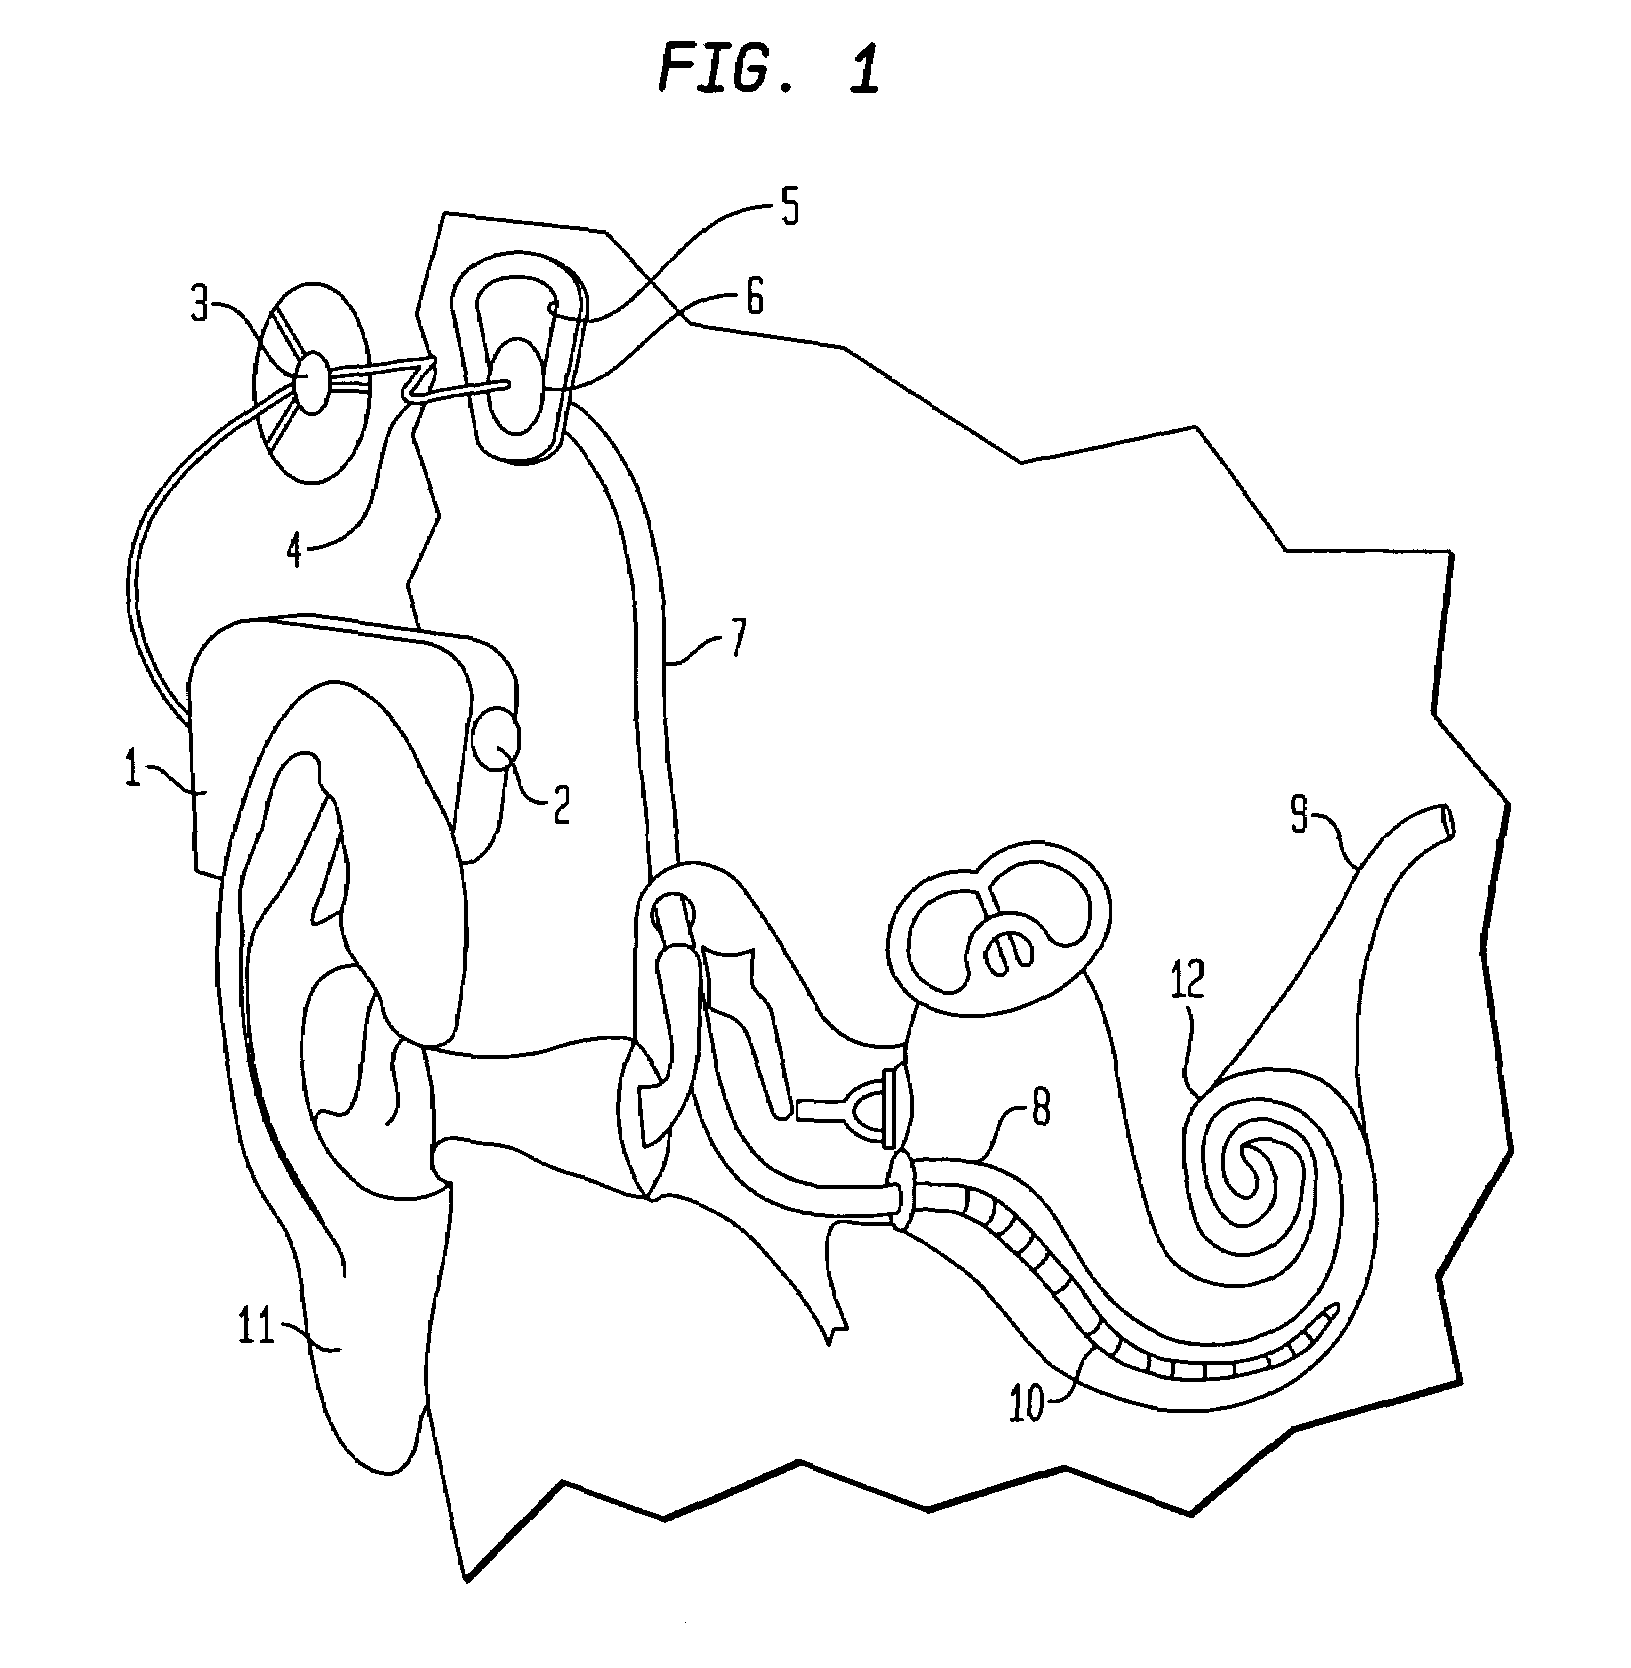 Cochlear implant having patient-specific parameter storage